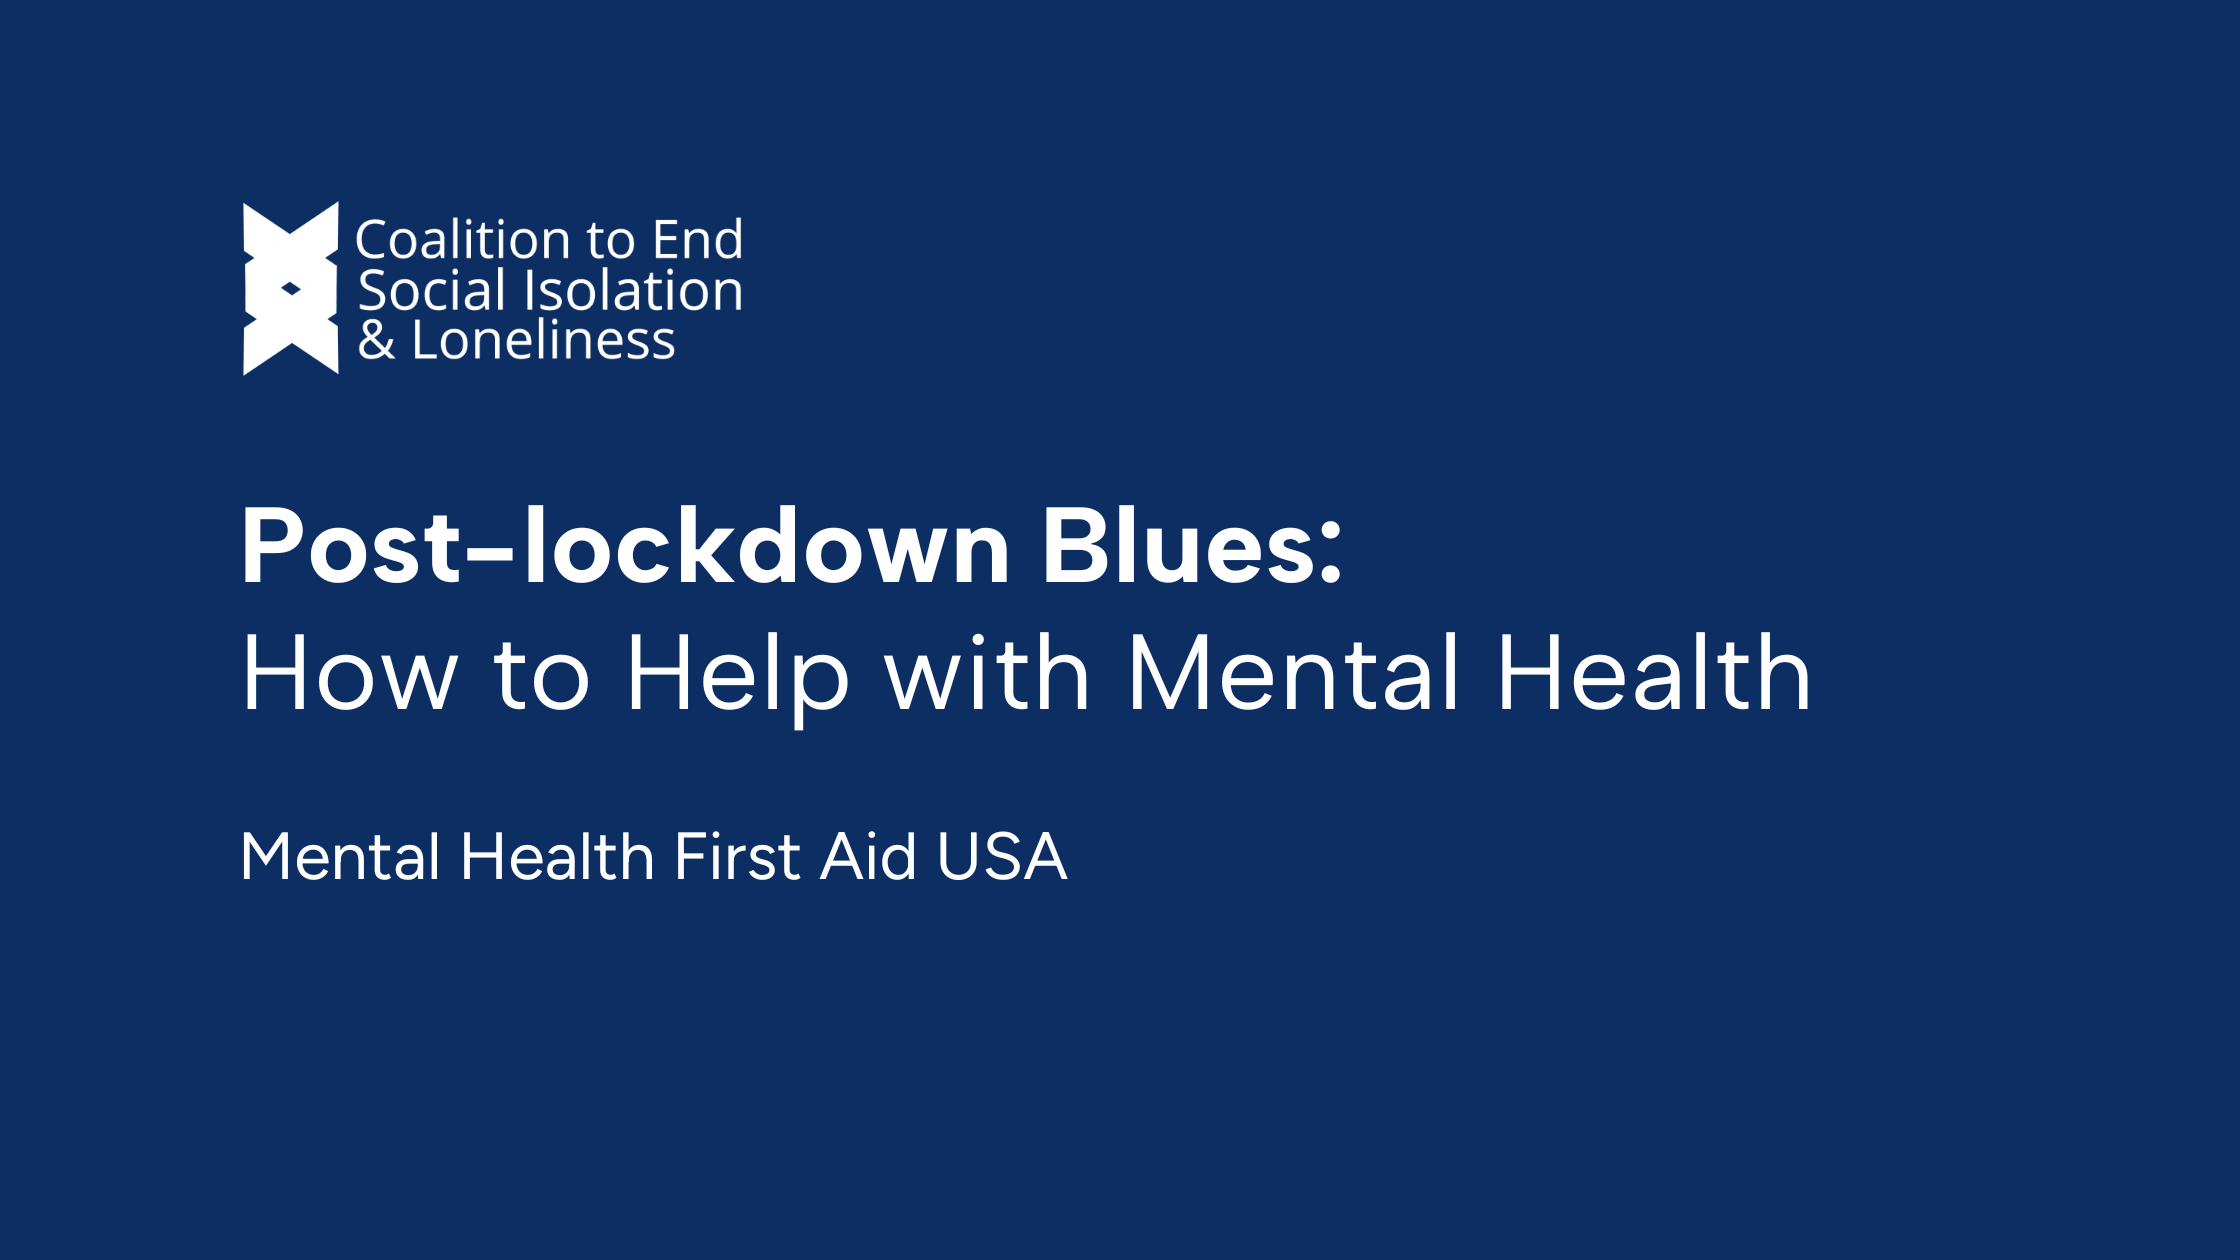 Post-lockdown Blues: How to Help with Mental Health First Aid